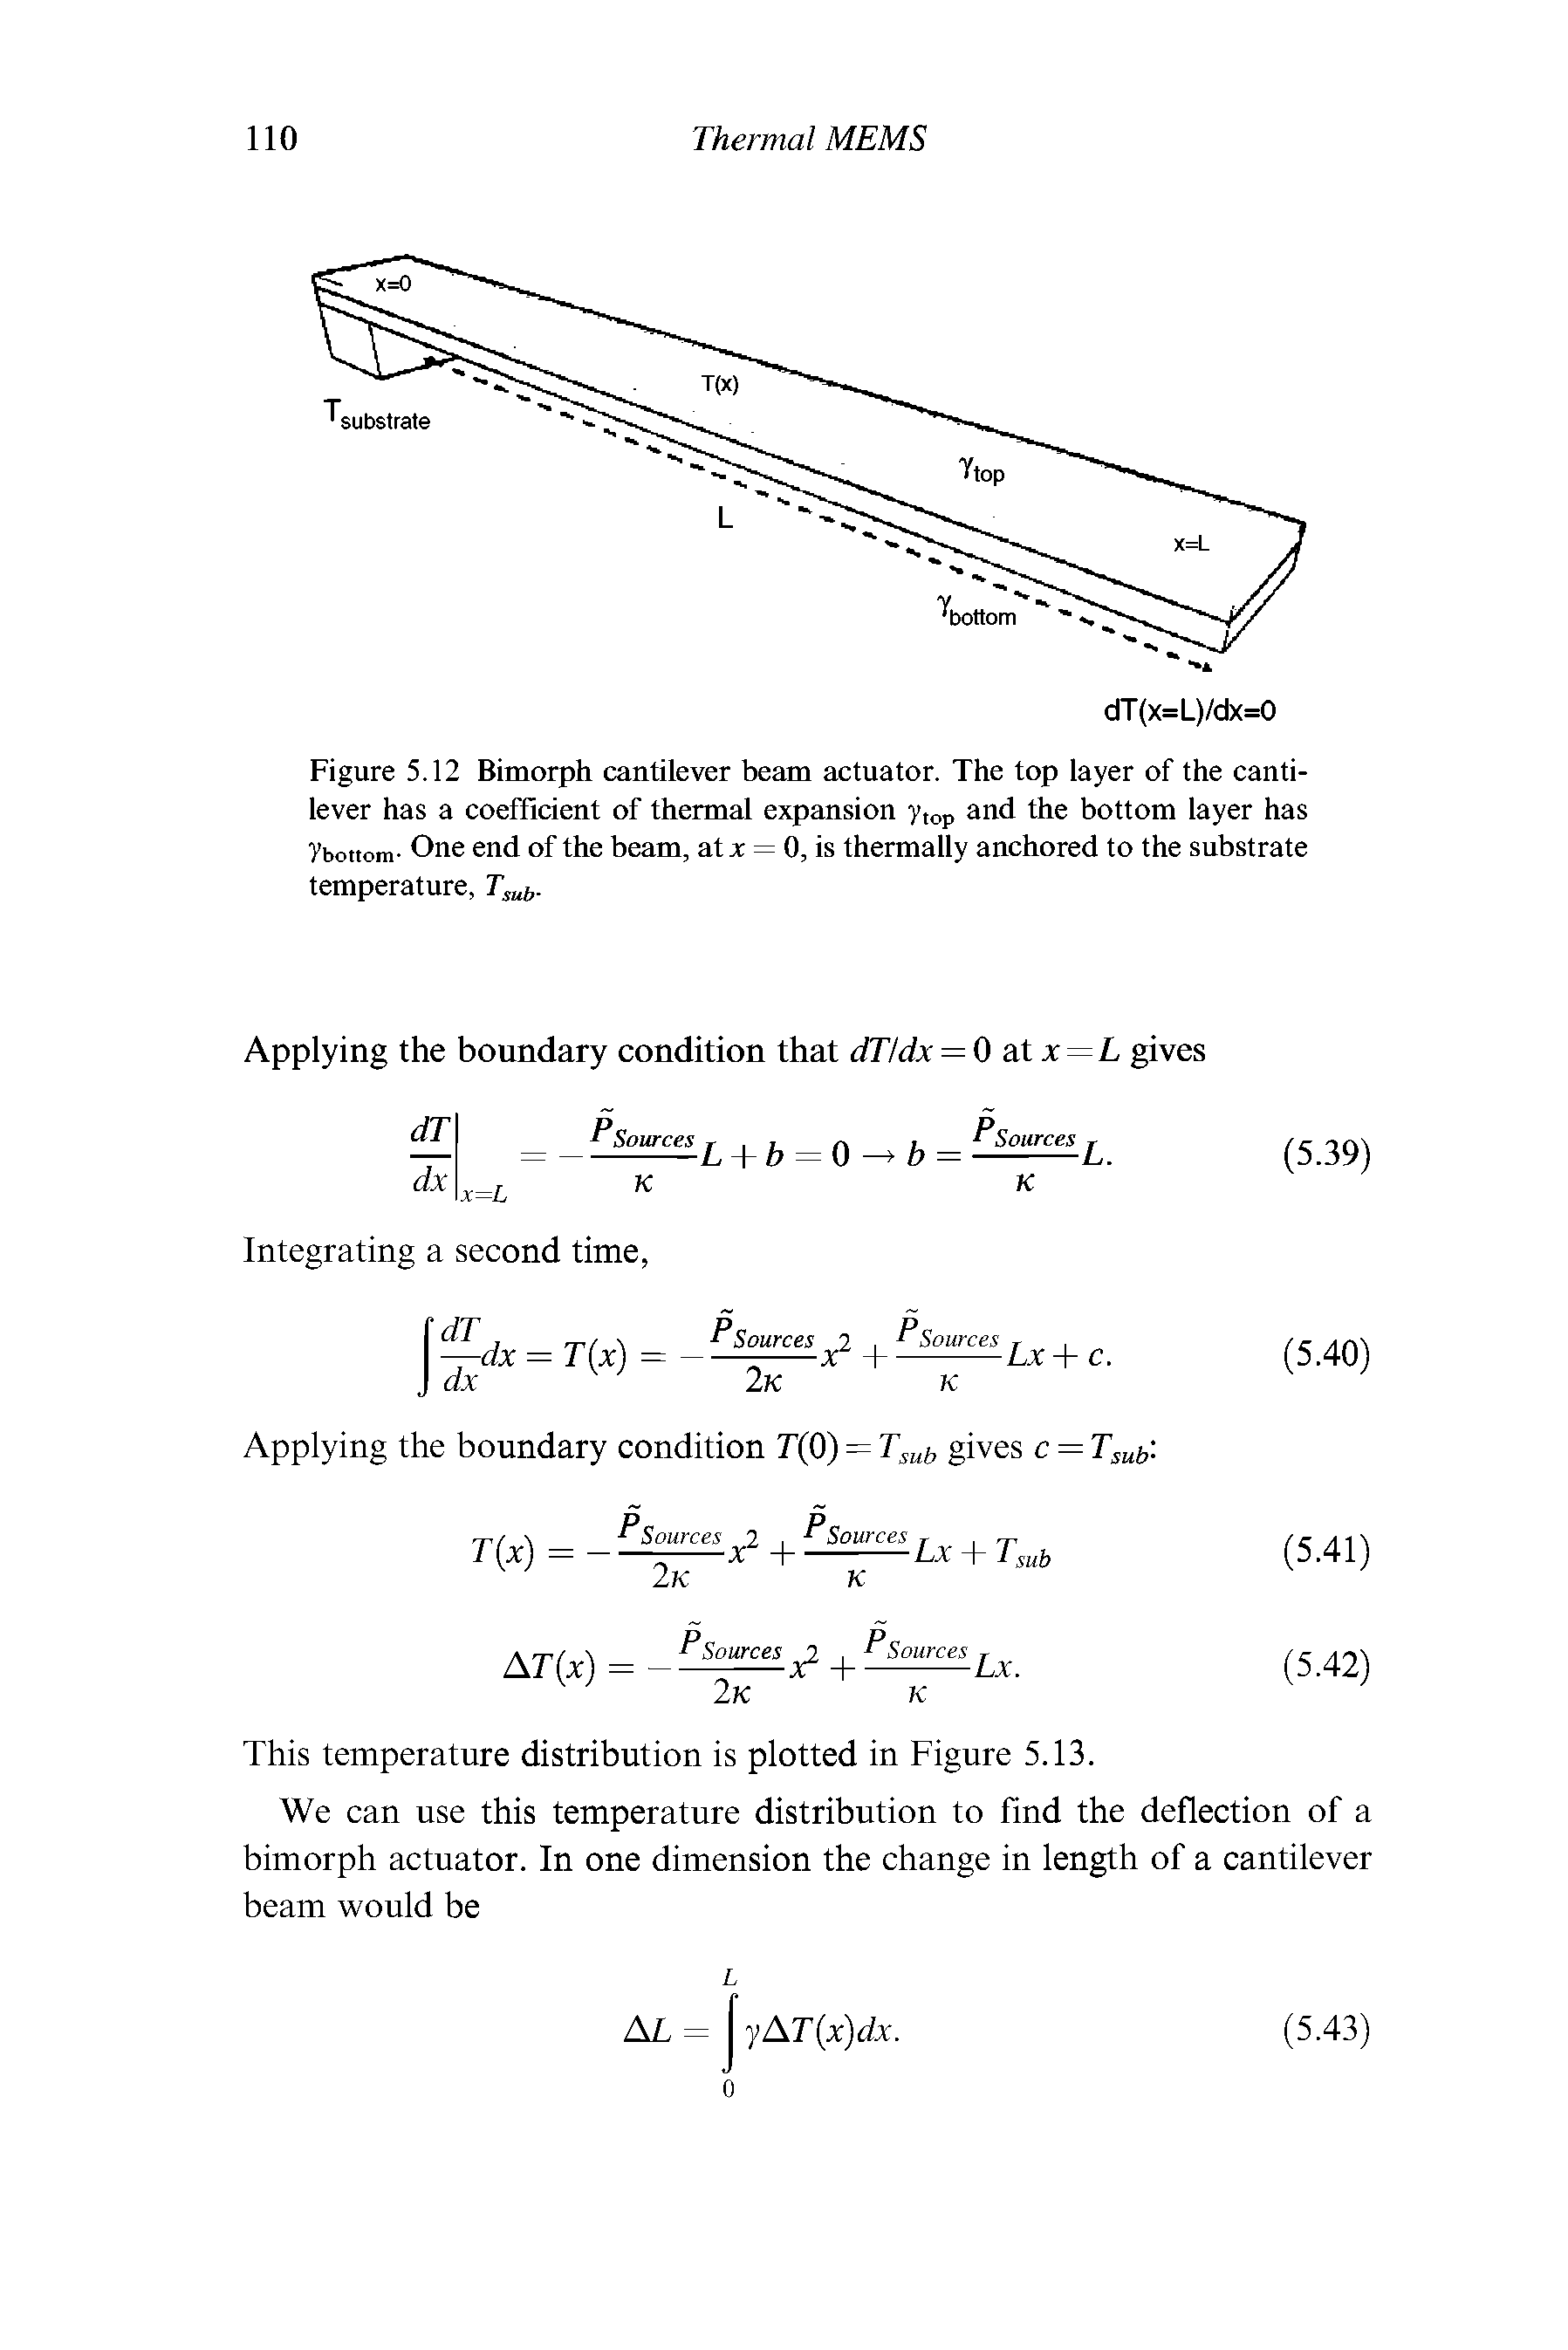 Figure 5.12 Bimorph cantilever beam actuator. The top layer of the cantilever has a coefficient of thermal expansion y,op and the bottom layer has ybottom- One end of the beam, at x = 0, is thermally anchored to the substrate temperature, T. ...